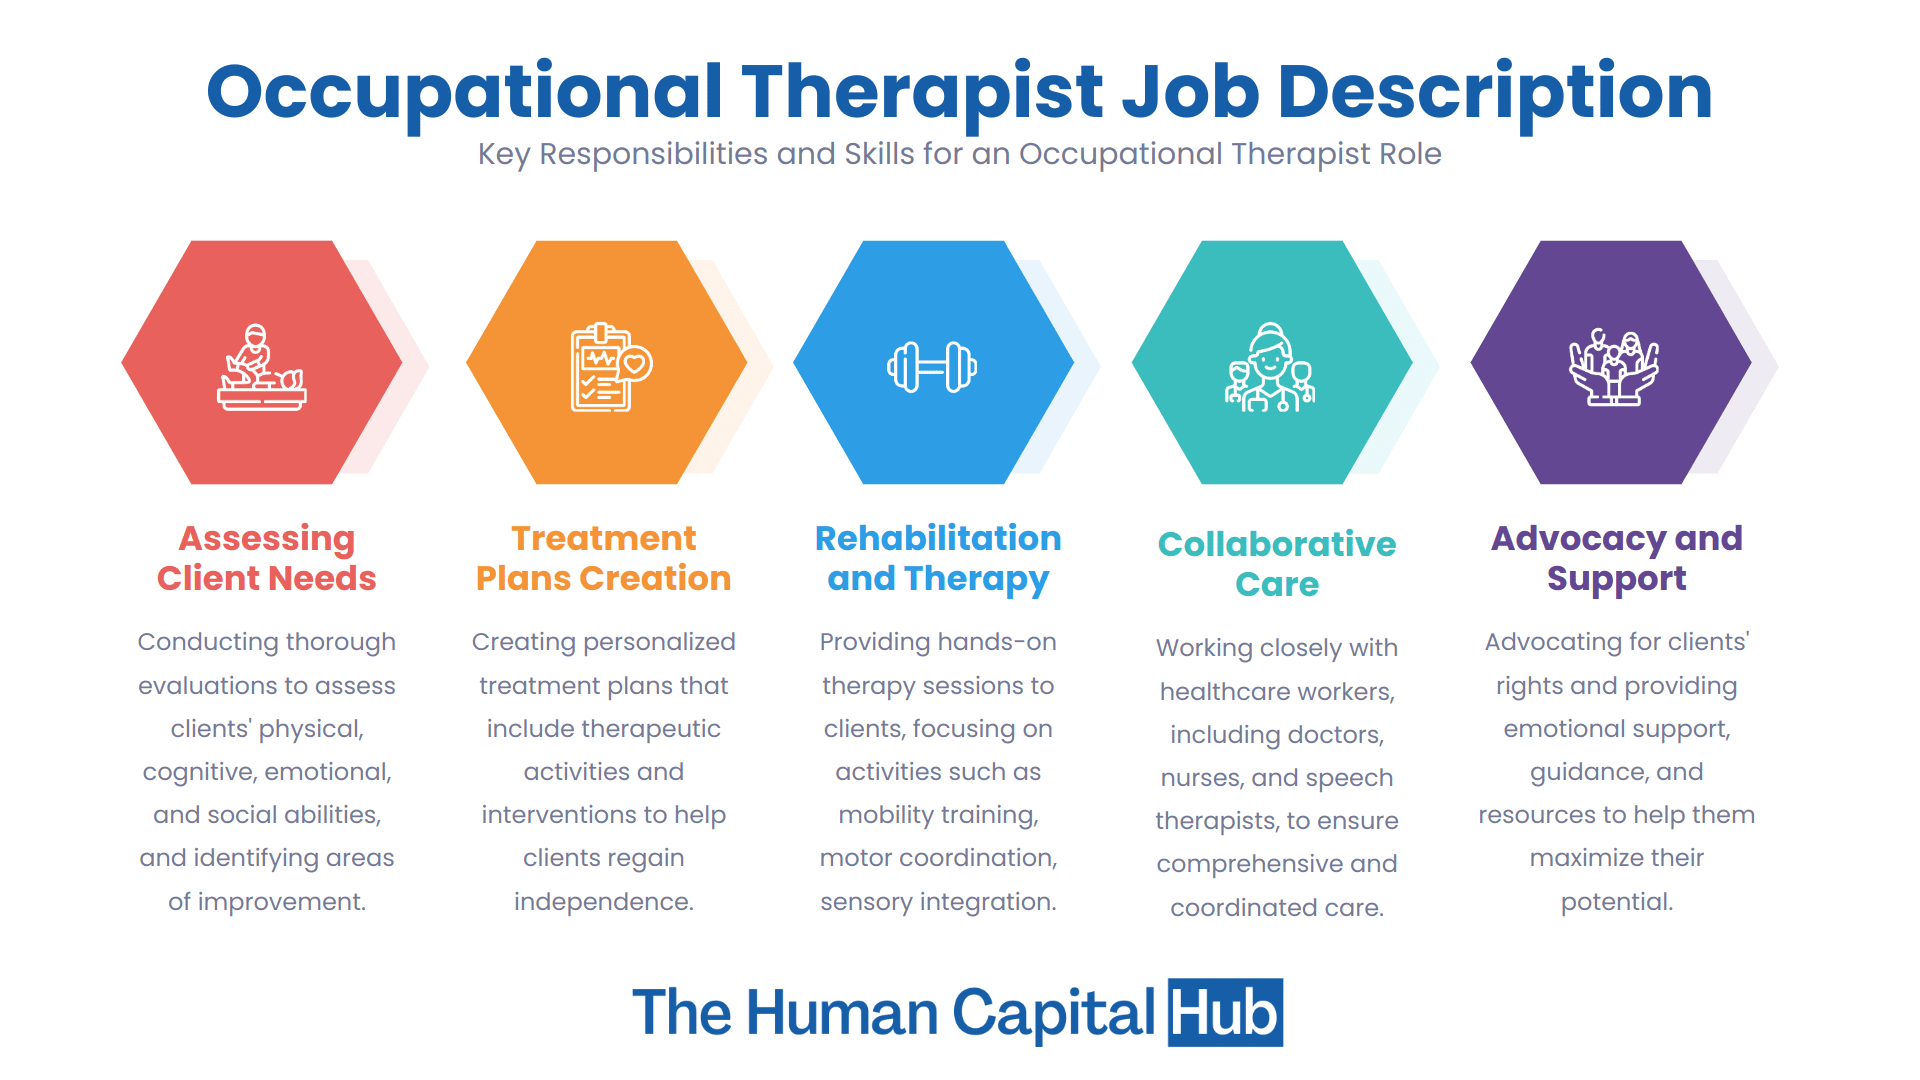 What is the primary role of an occupational therapist?